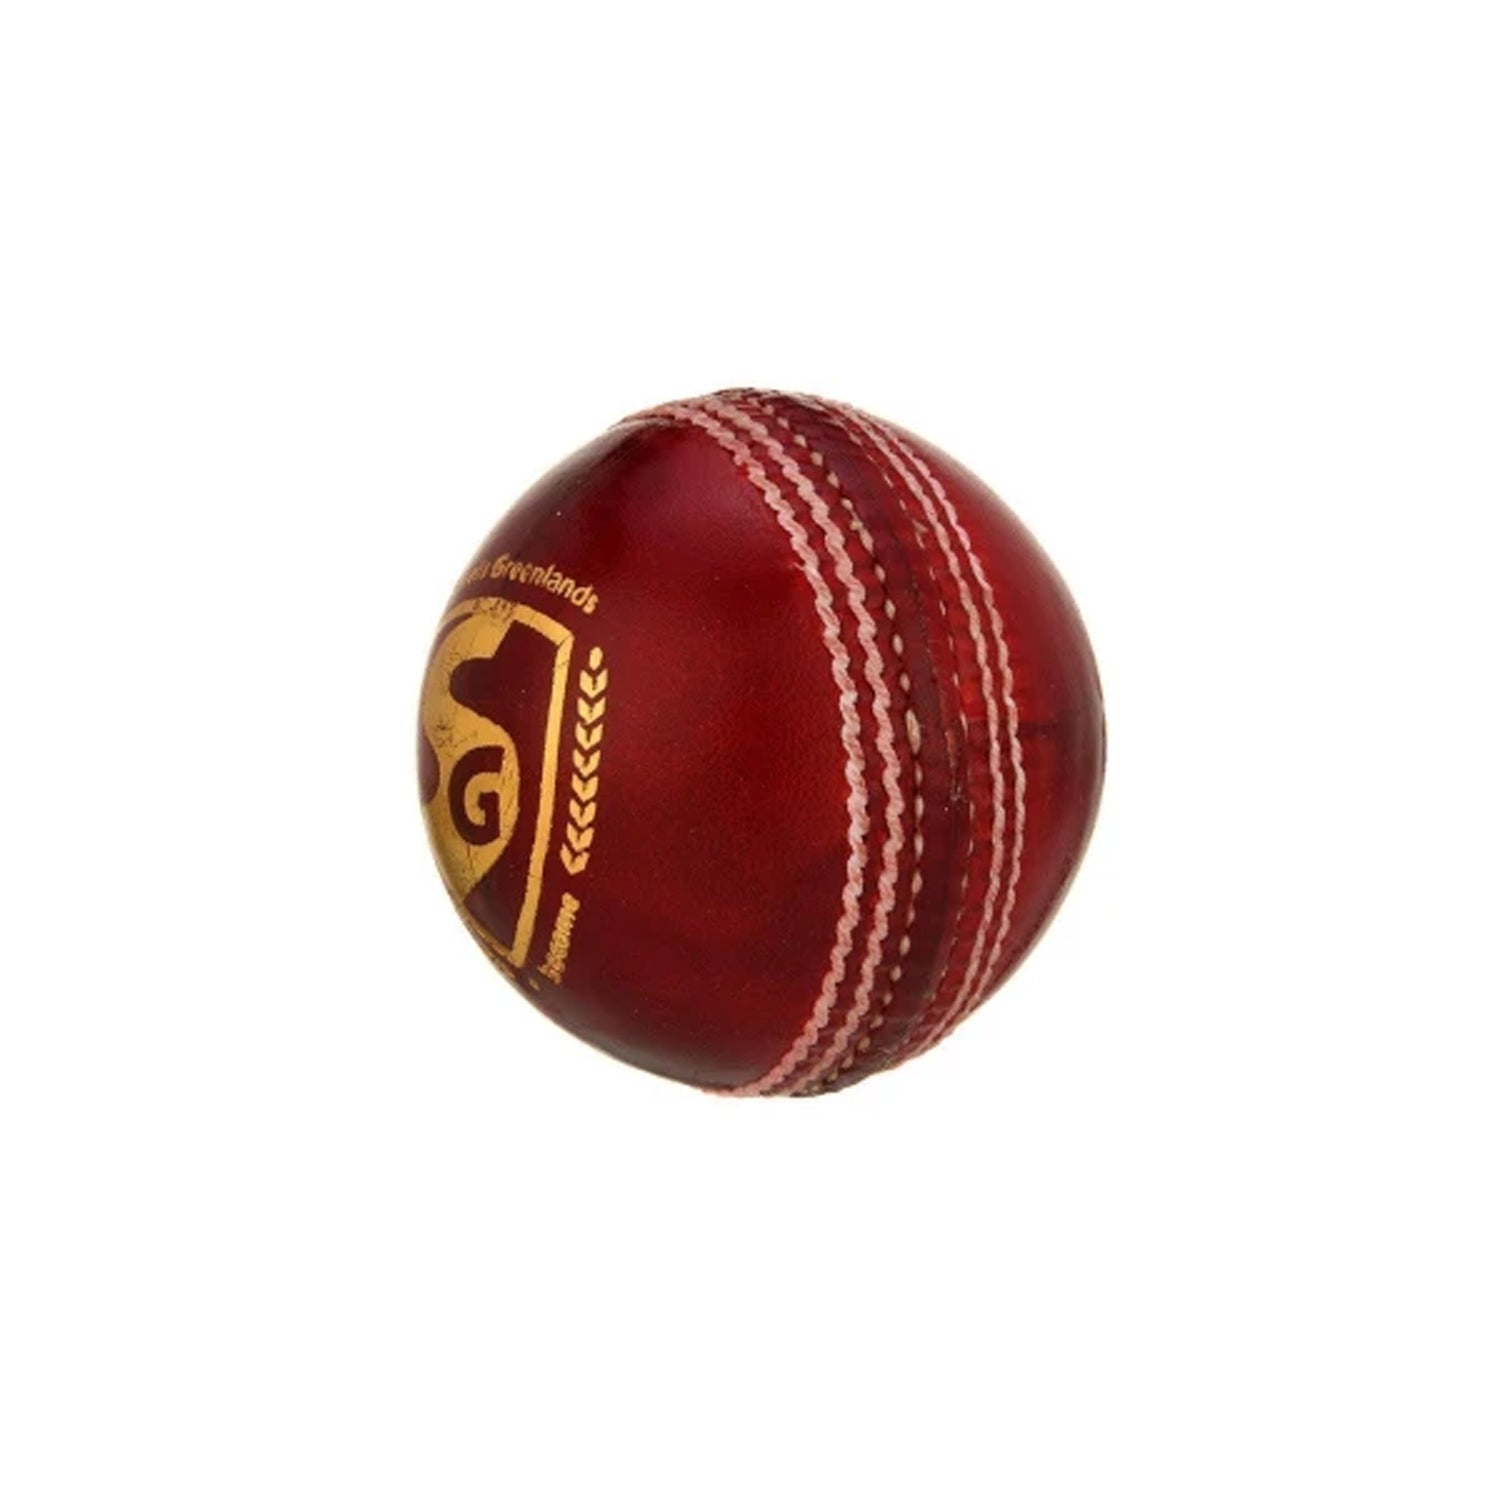 SG Club High Quality Four-Piece Water Proof Cricket Leather Ball, 1PC - Best Price online Prokicksports.com